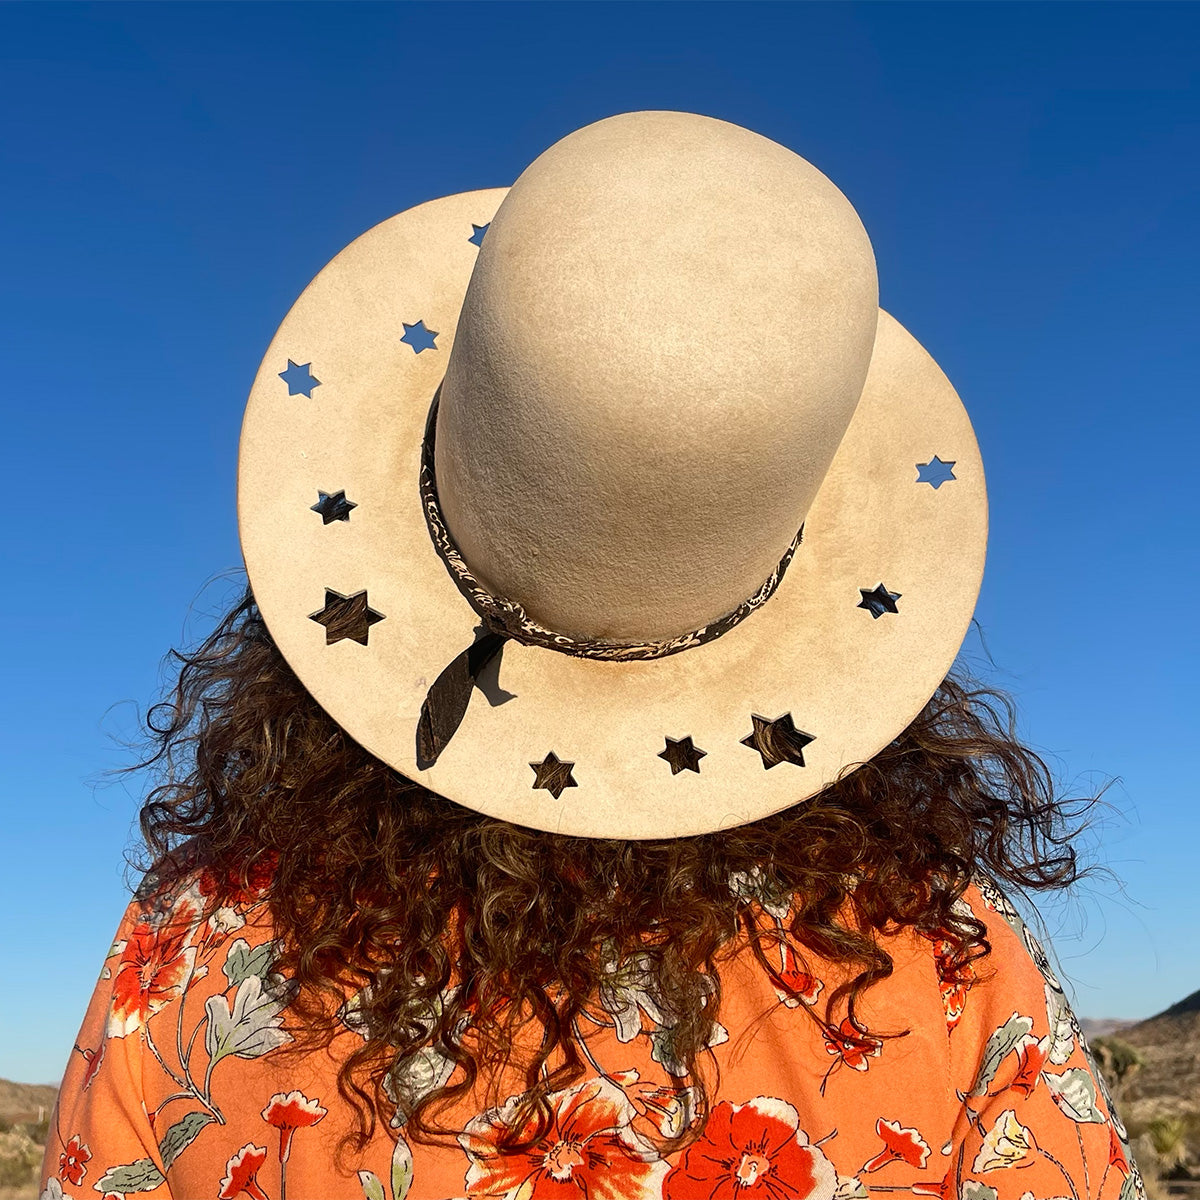 Woman wearing large custom hat with stars cut out